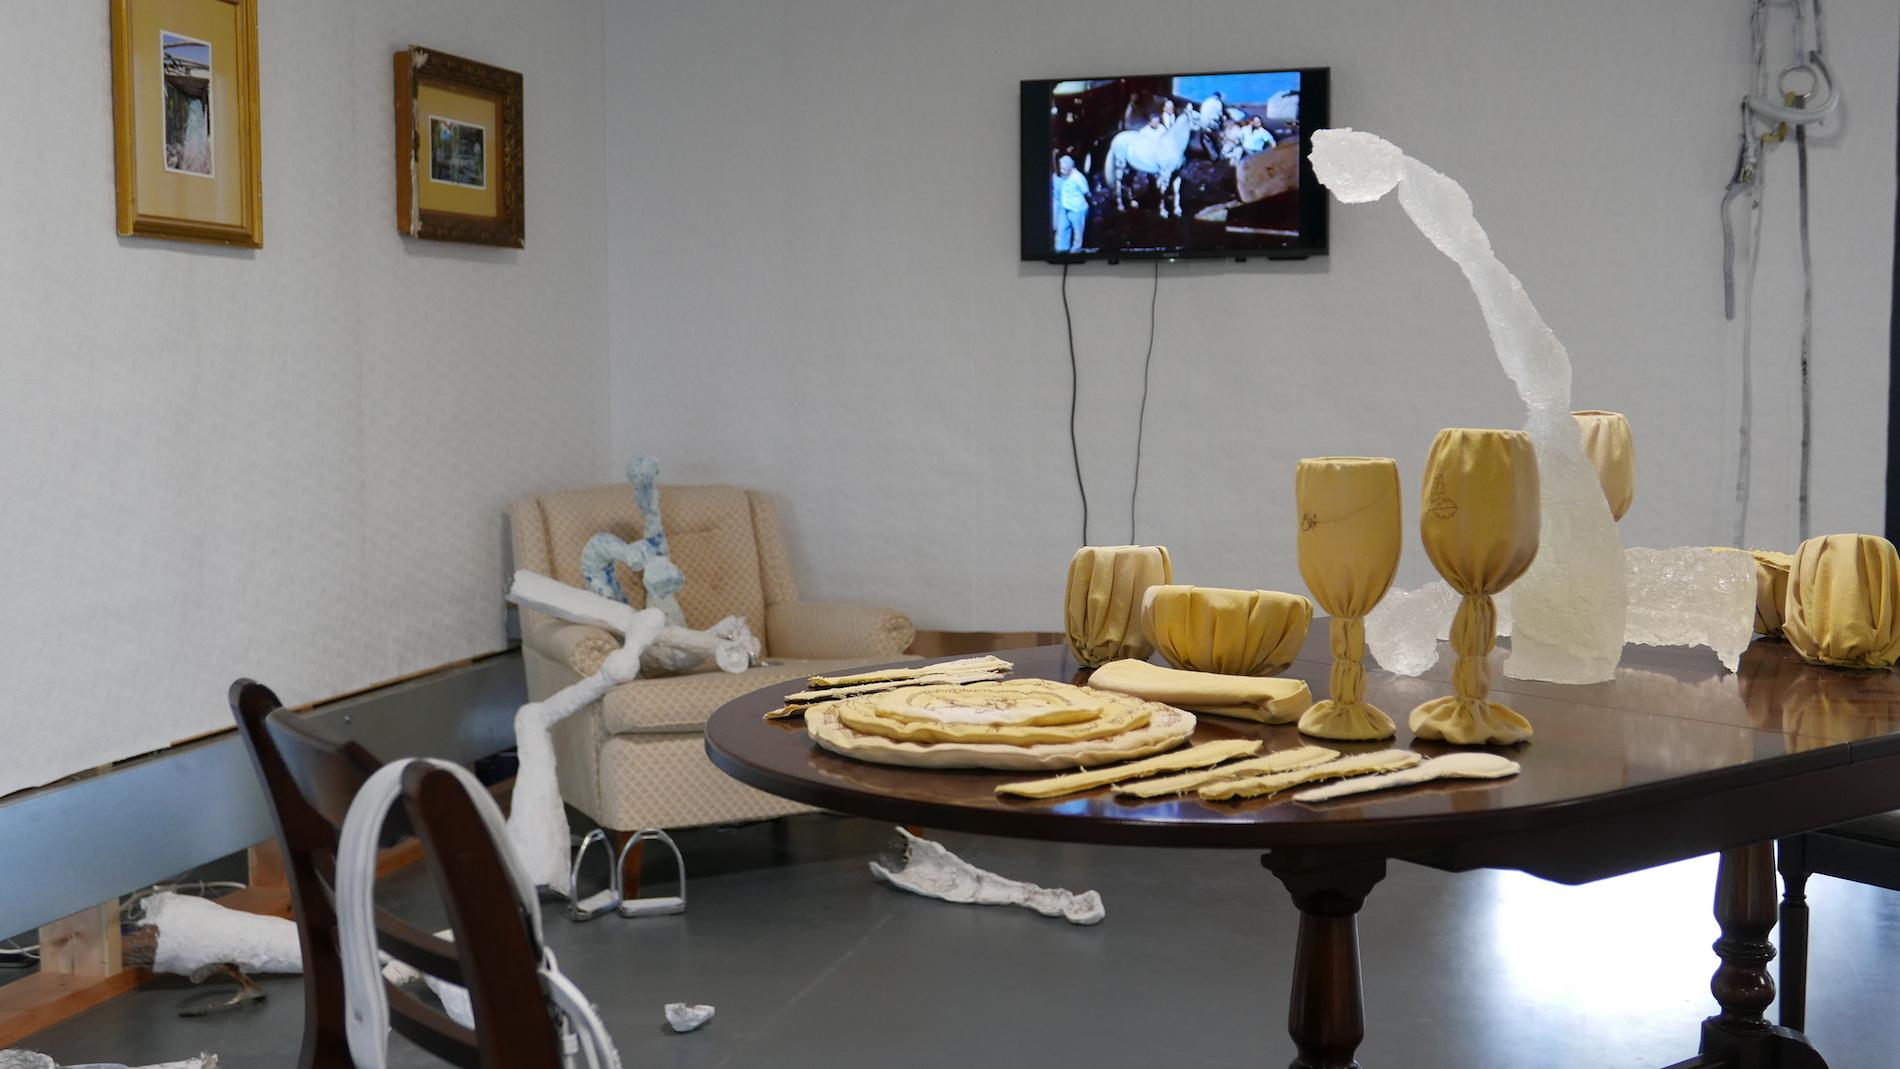 Dining on Leftover Legacy, 2022, Installation. Meghan Murphy